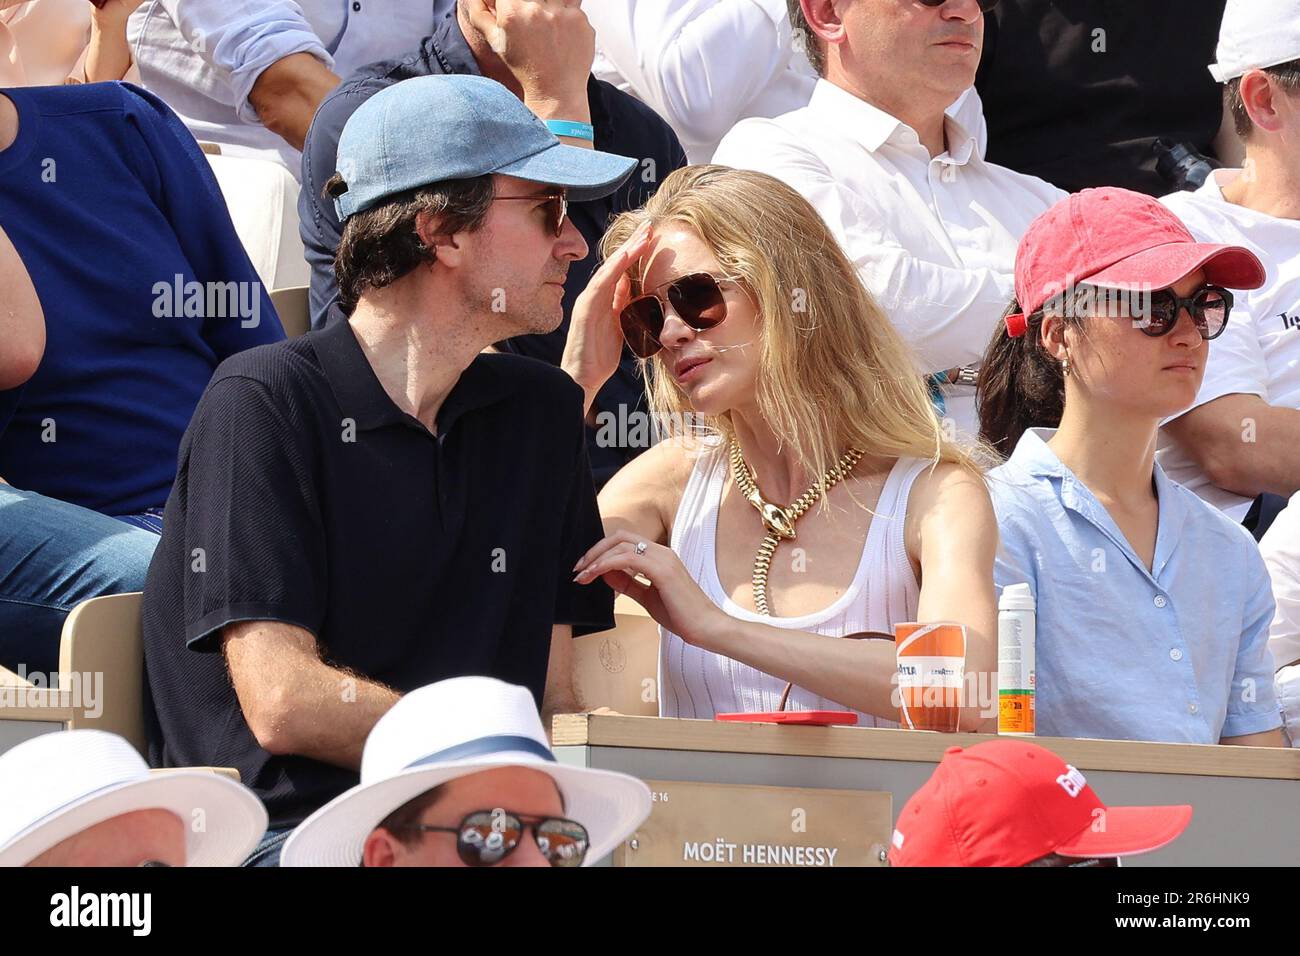 Singer Tyler, The Creator in stands during French Tennis Open at